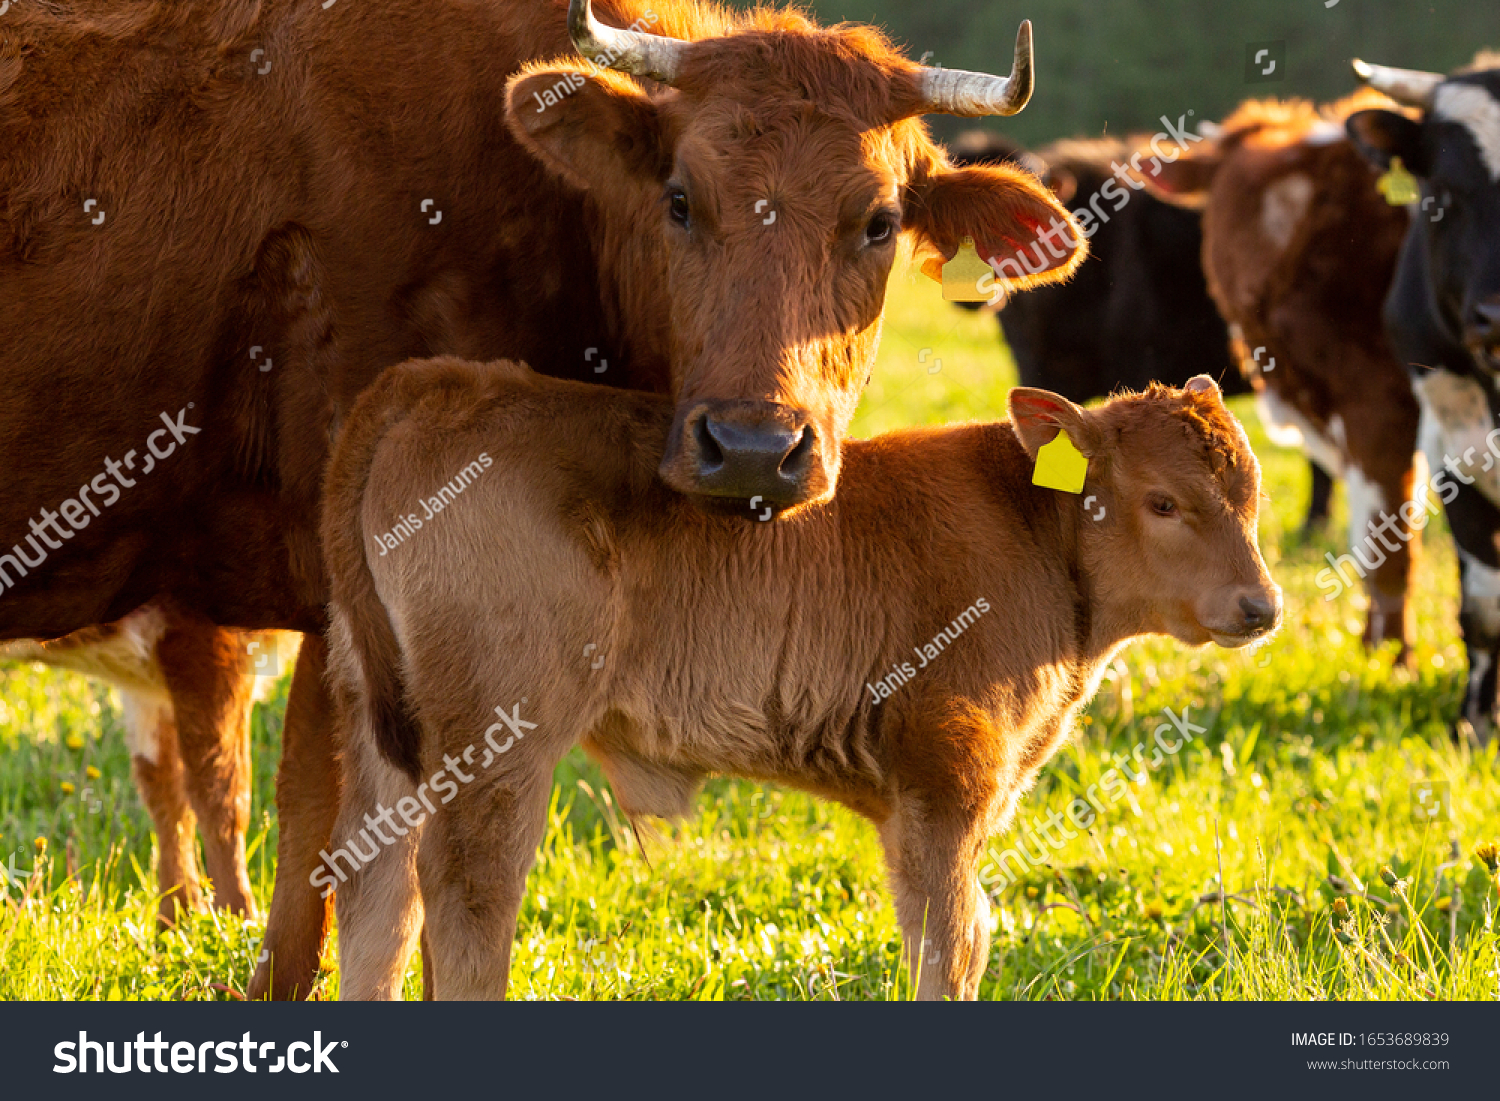 A herd of cows and a calf on a farm meadow during a summer day. #1653689839